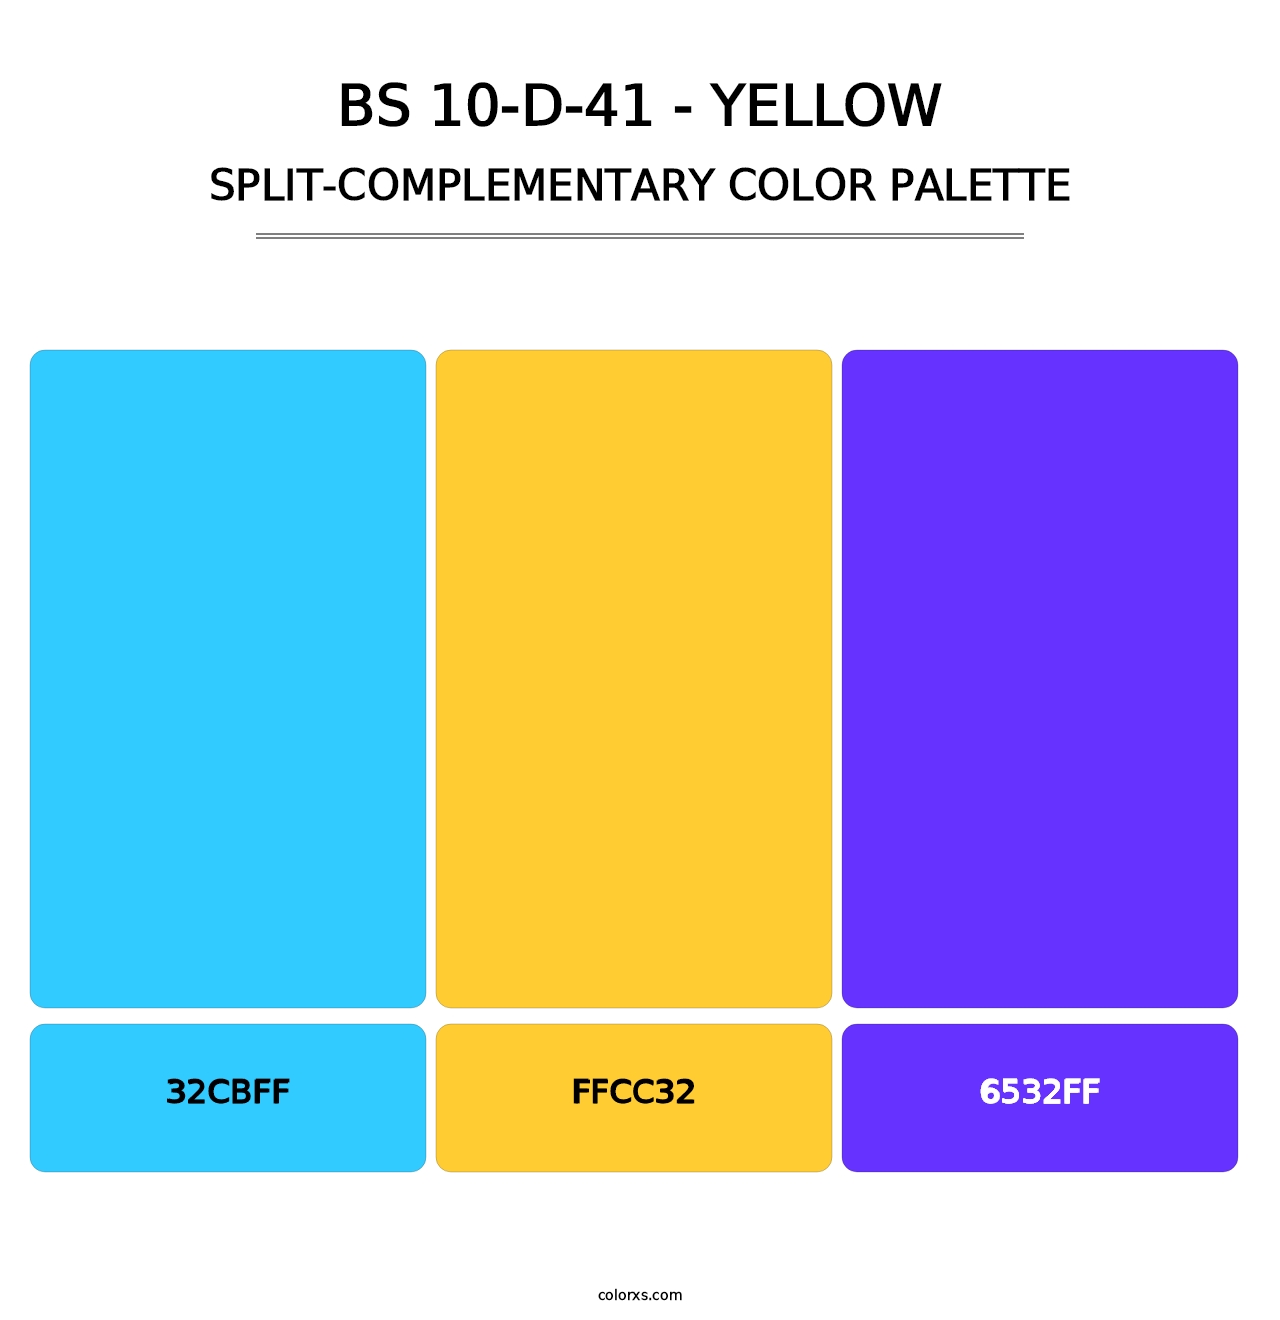 BS 10-D-41 - Yellow - Split-Complementary Color Palette